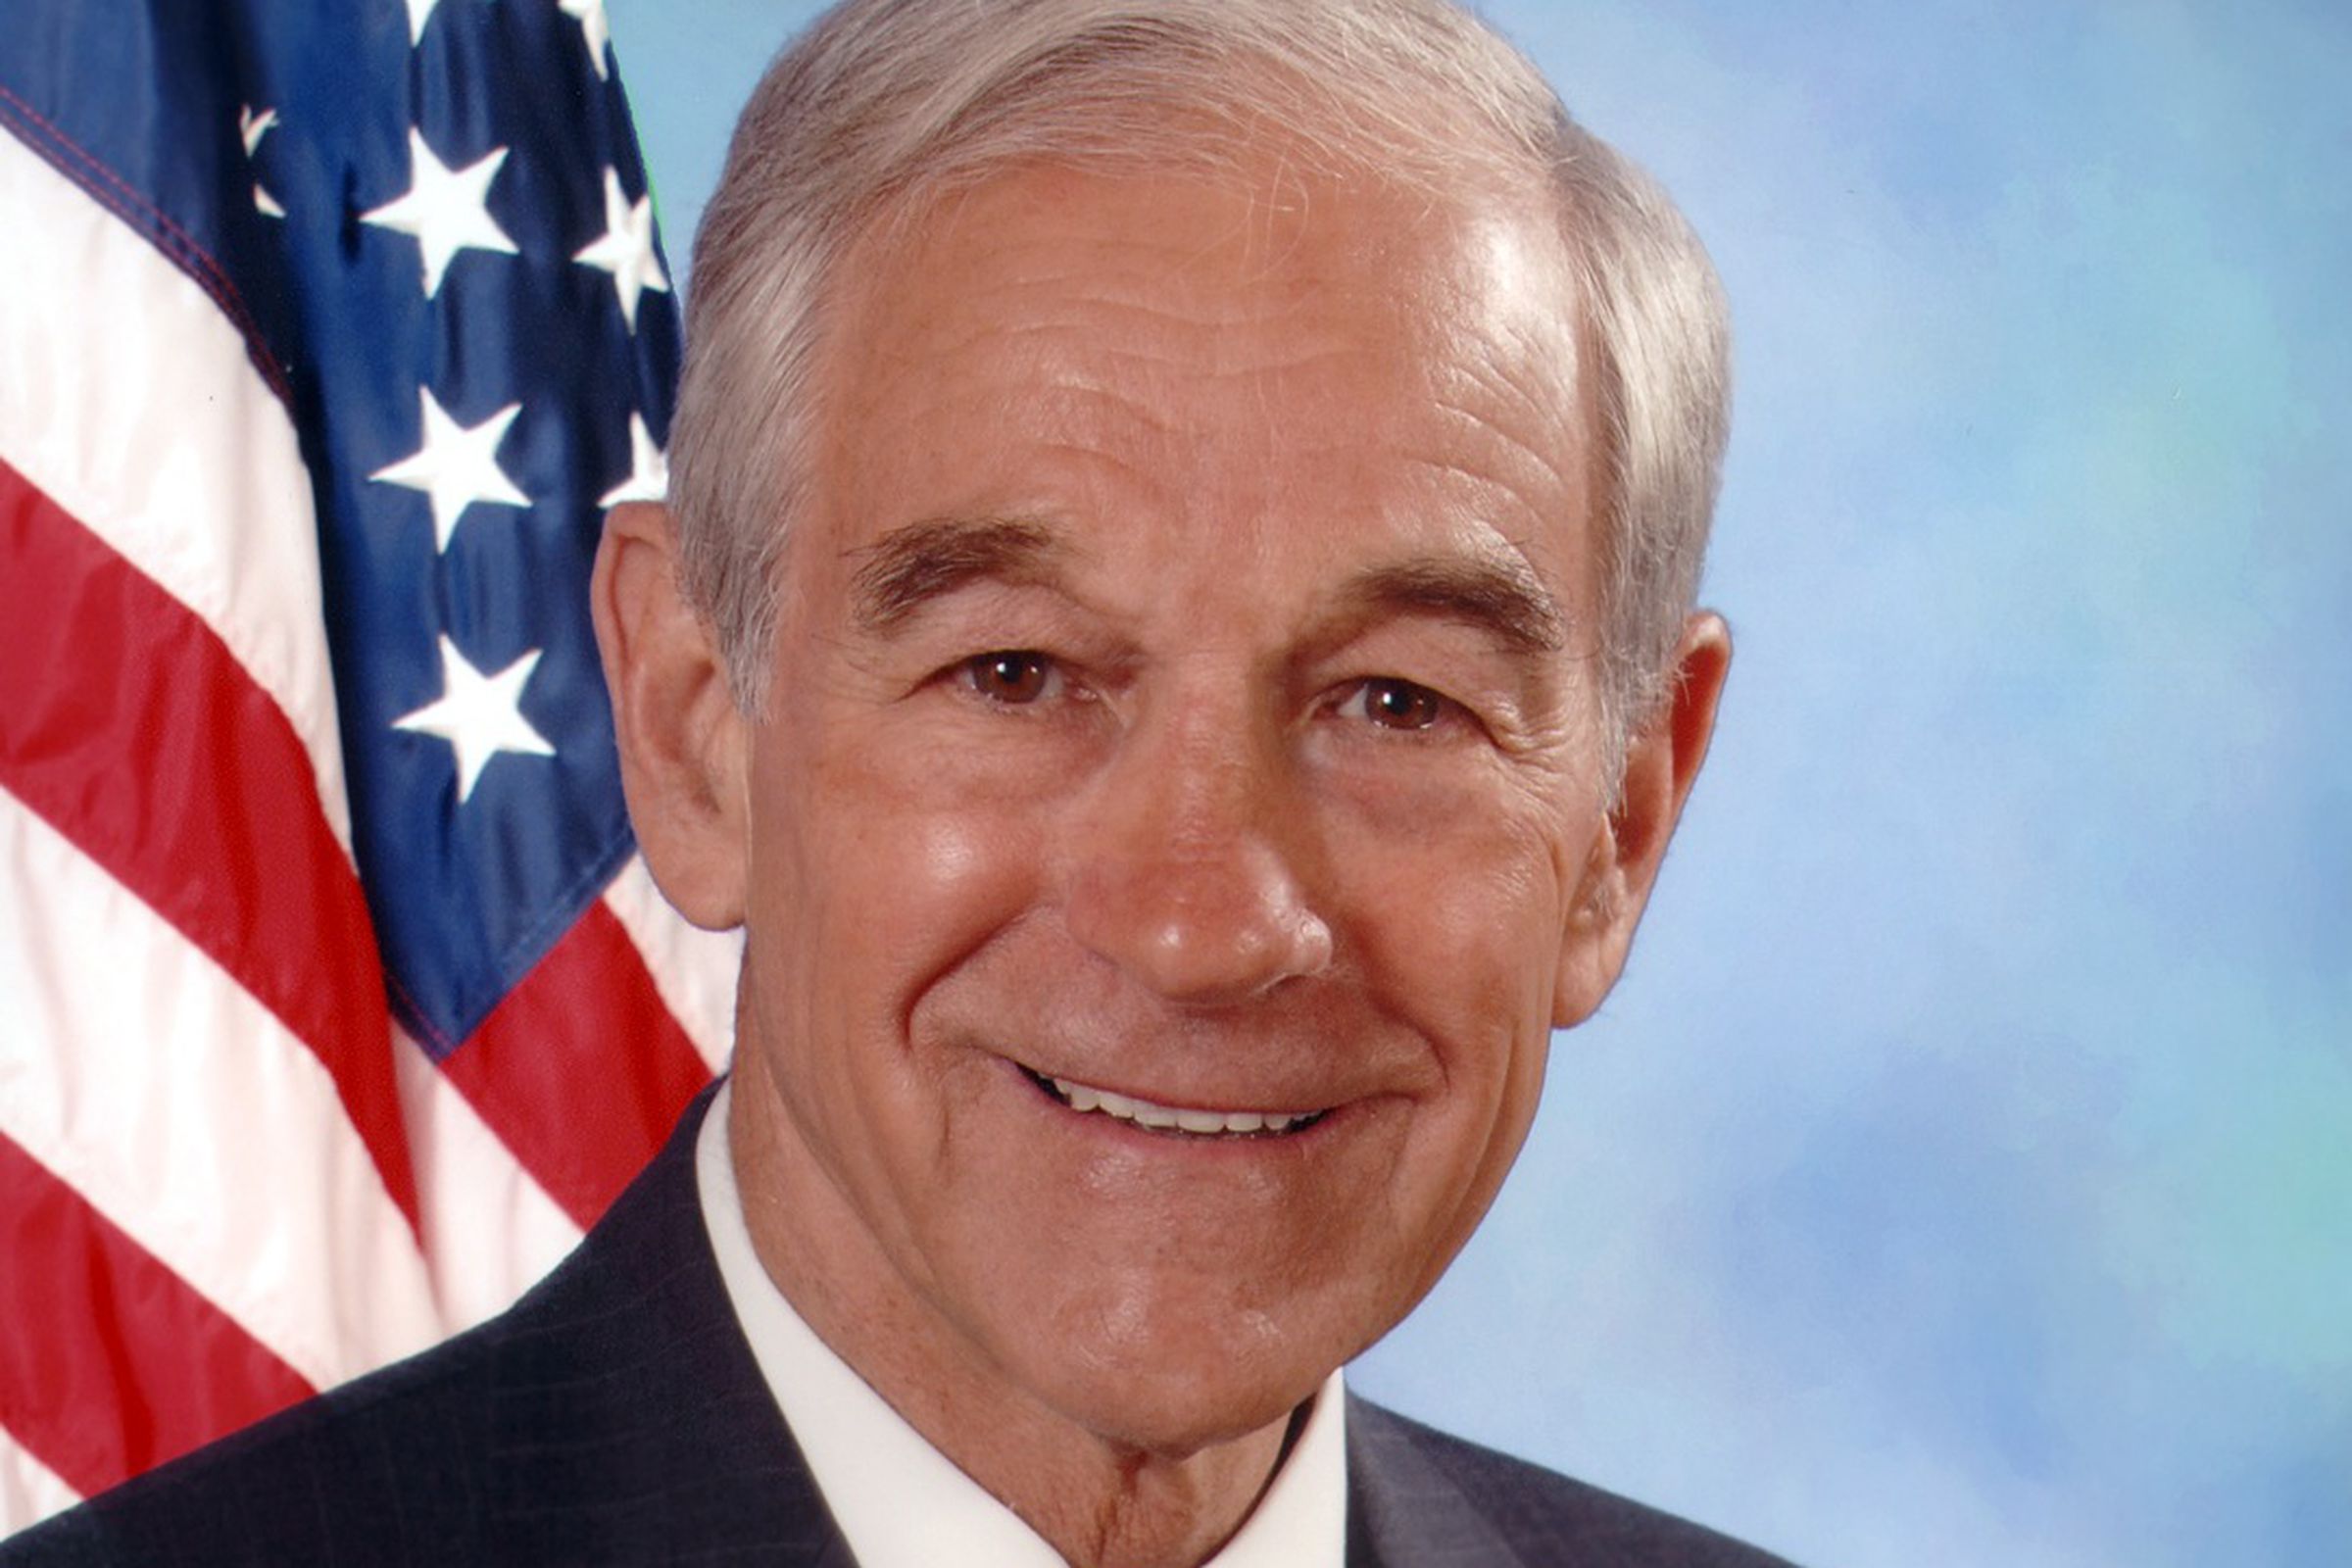 Ron Paul Asks UN To Strip RonPaul Domain Ownership Away From 